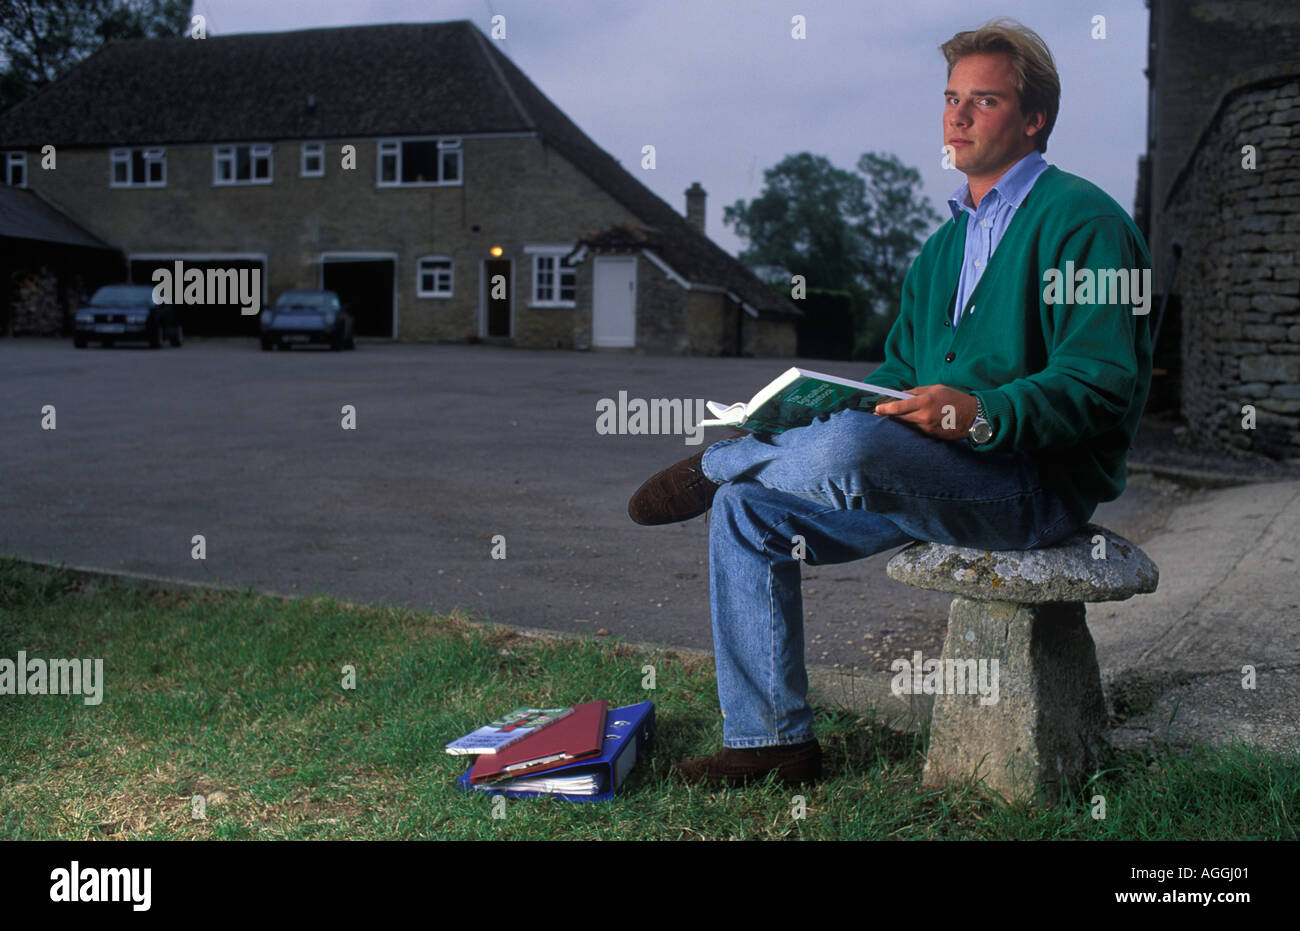 Tara Getty, Getty family member a student at Cirencester Royal Agricultural College, Gloucestershire. UK 1990s circa 1995 England  HOMER SYKES Stock Photo